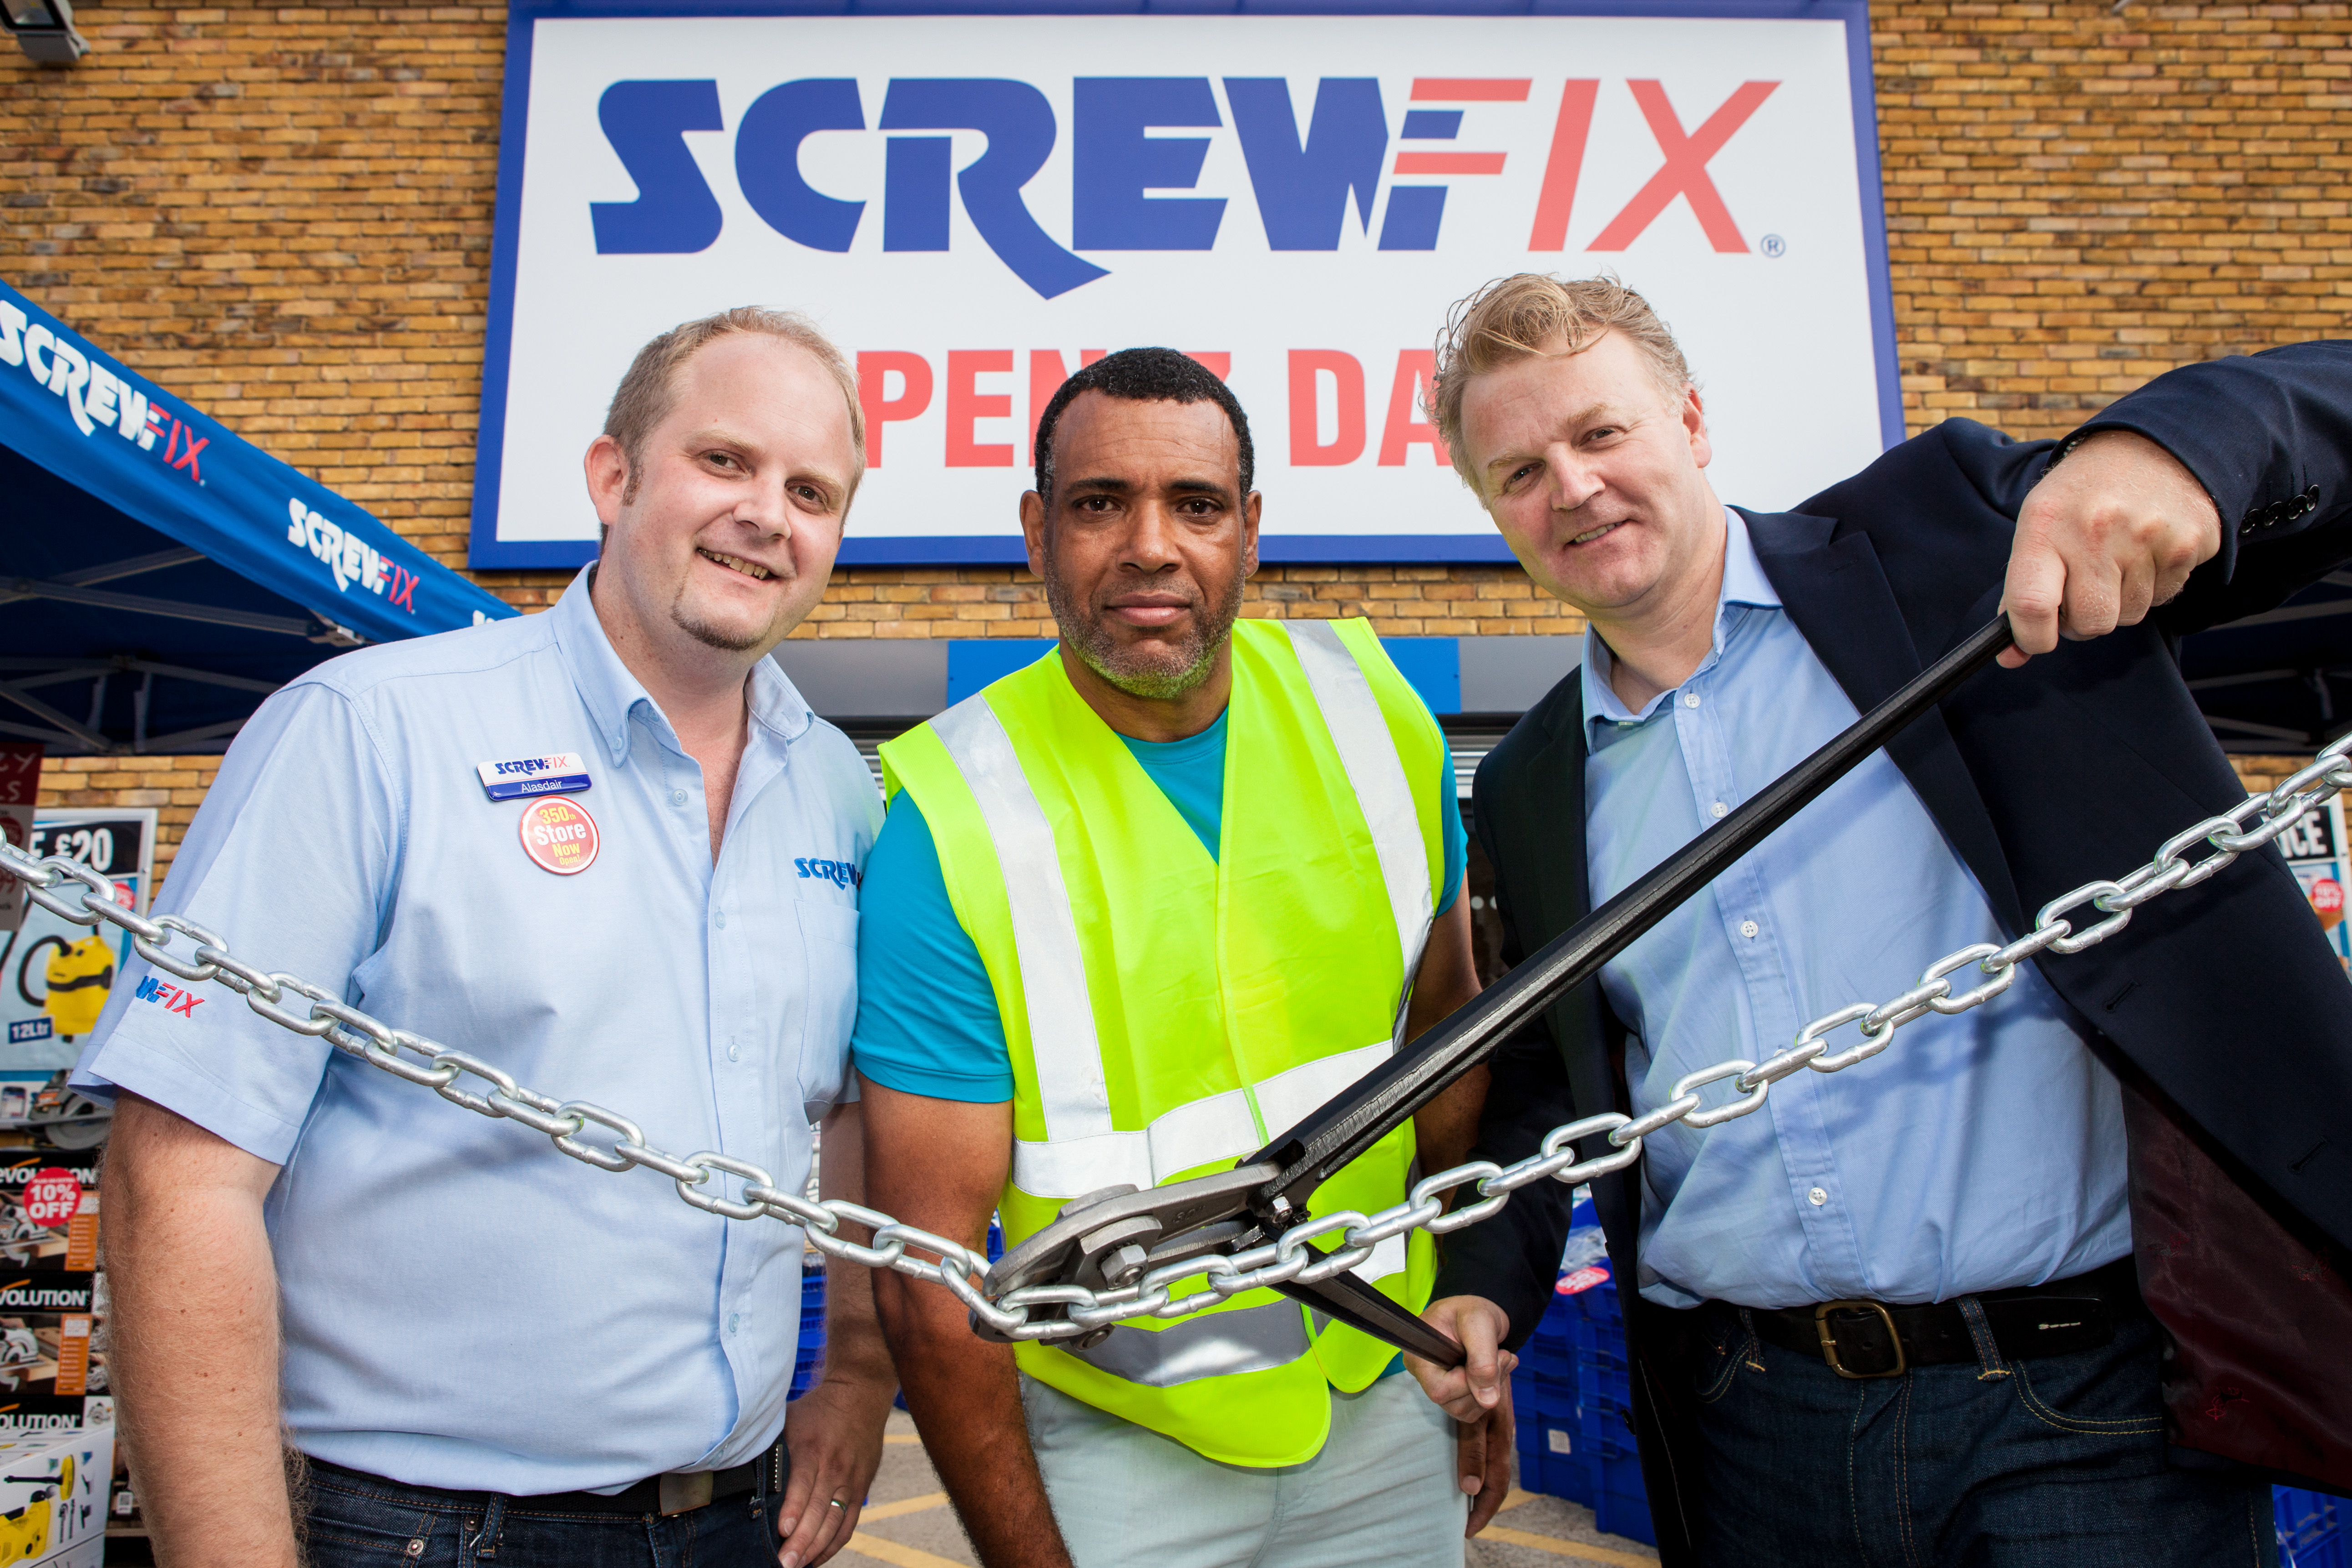 Screwfix celebrates with the launch of its 350th store